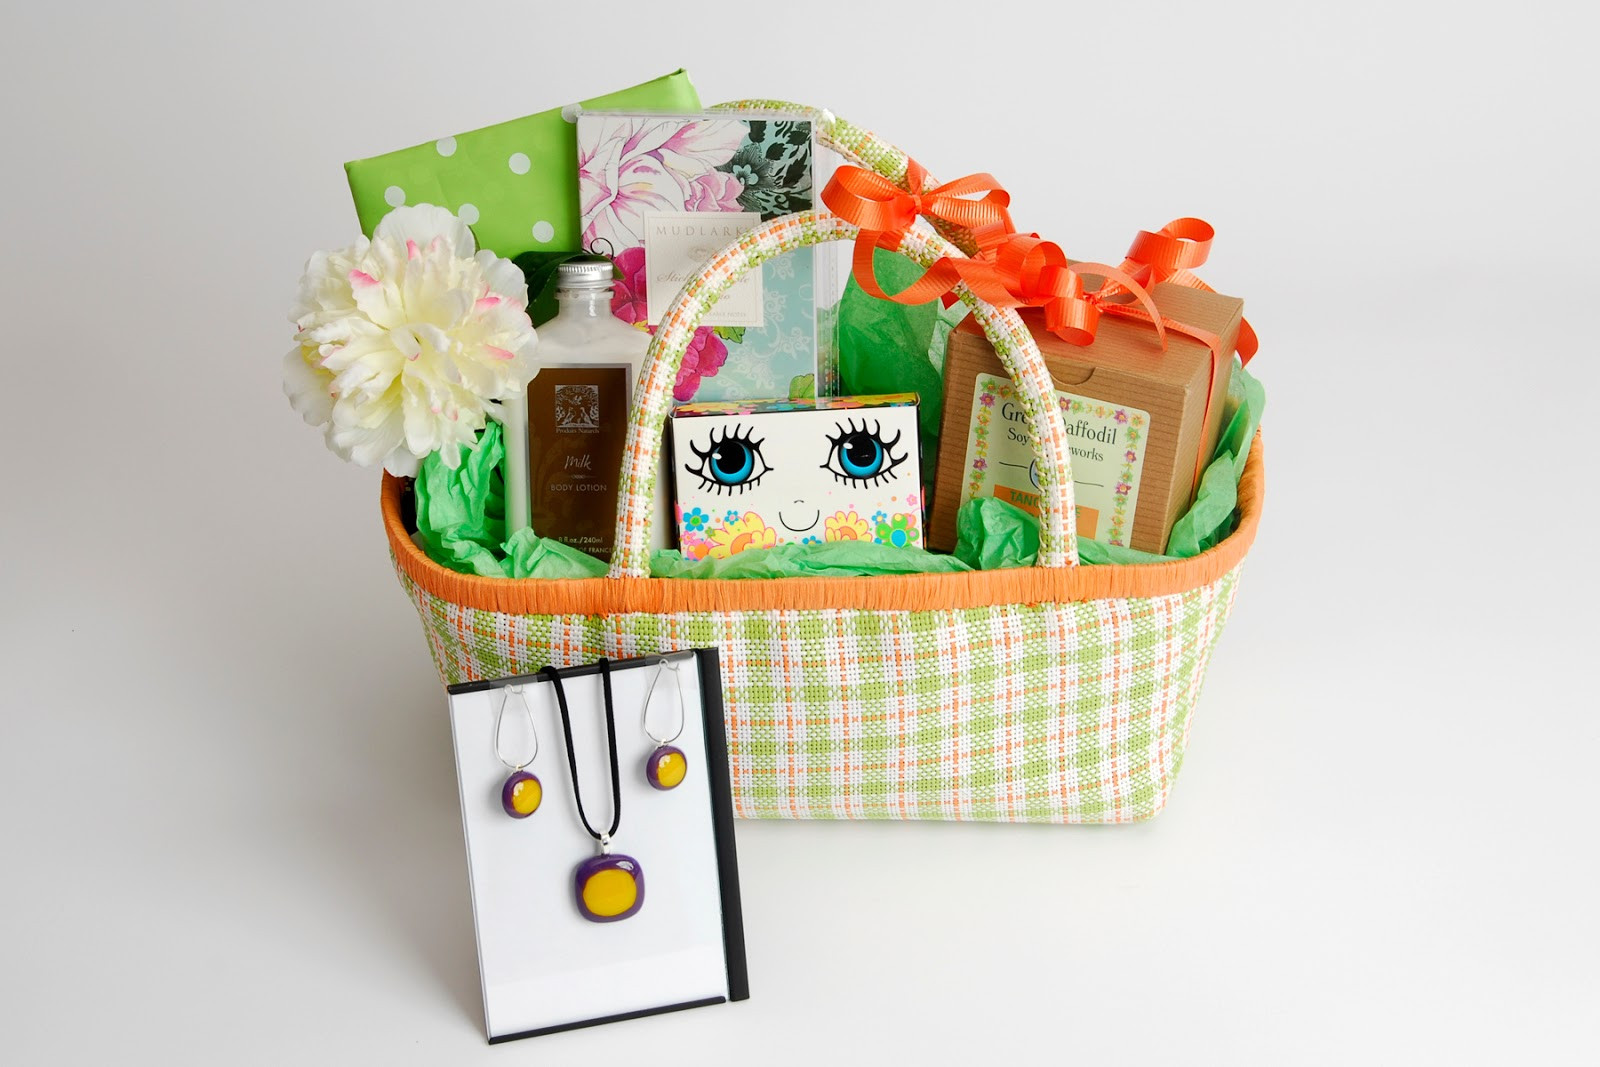 Ladies Gift Basket Ideas
 Thoughtful Presence 5 Great Gift Basket Ideas For Women